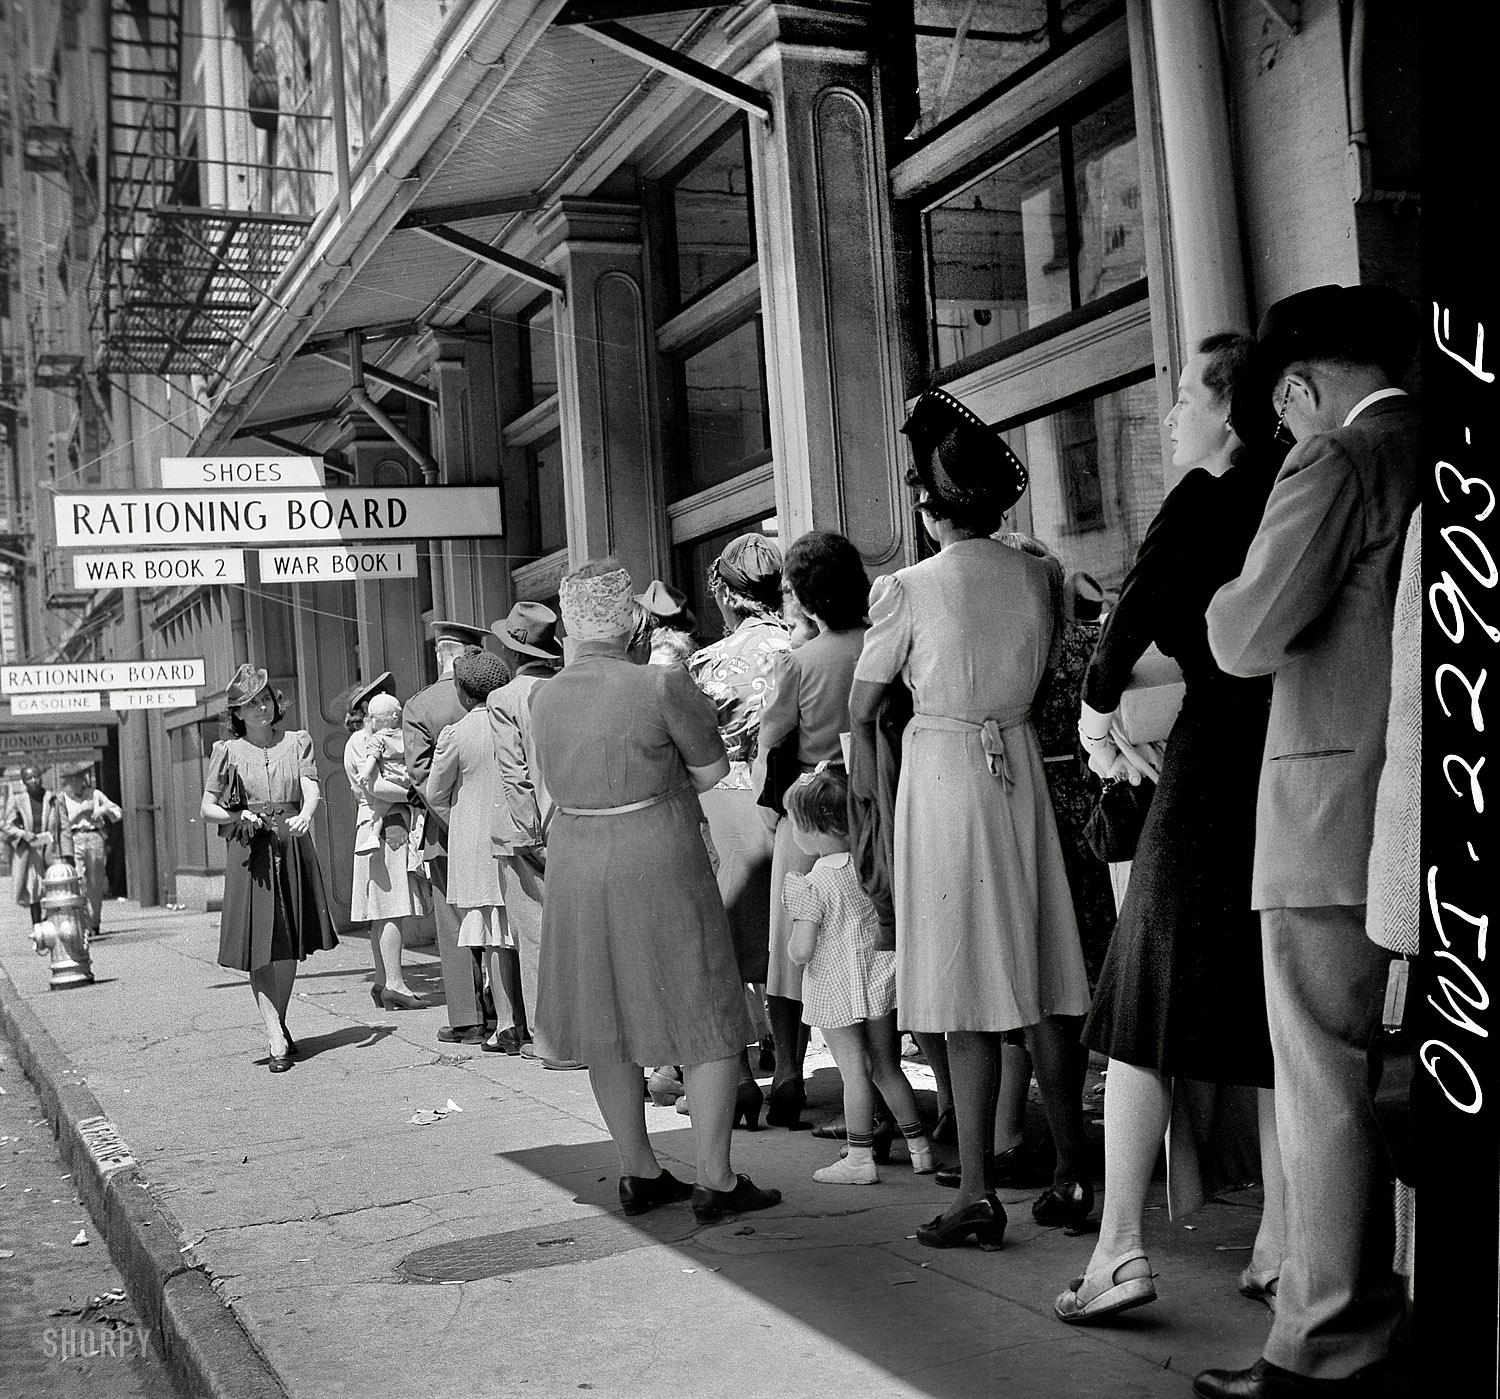 March 1943. "New Orleans, Louisiana. Line at rationing board." Medium format negative by John Vachon for the Office of War Information. View full size.